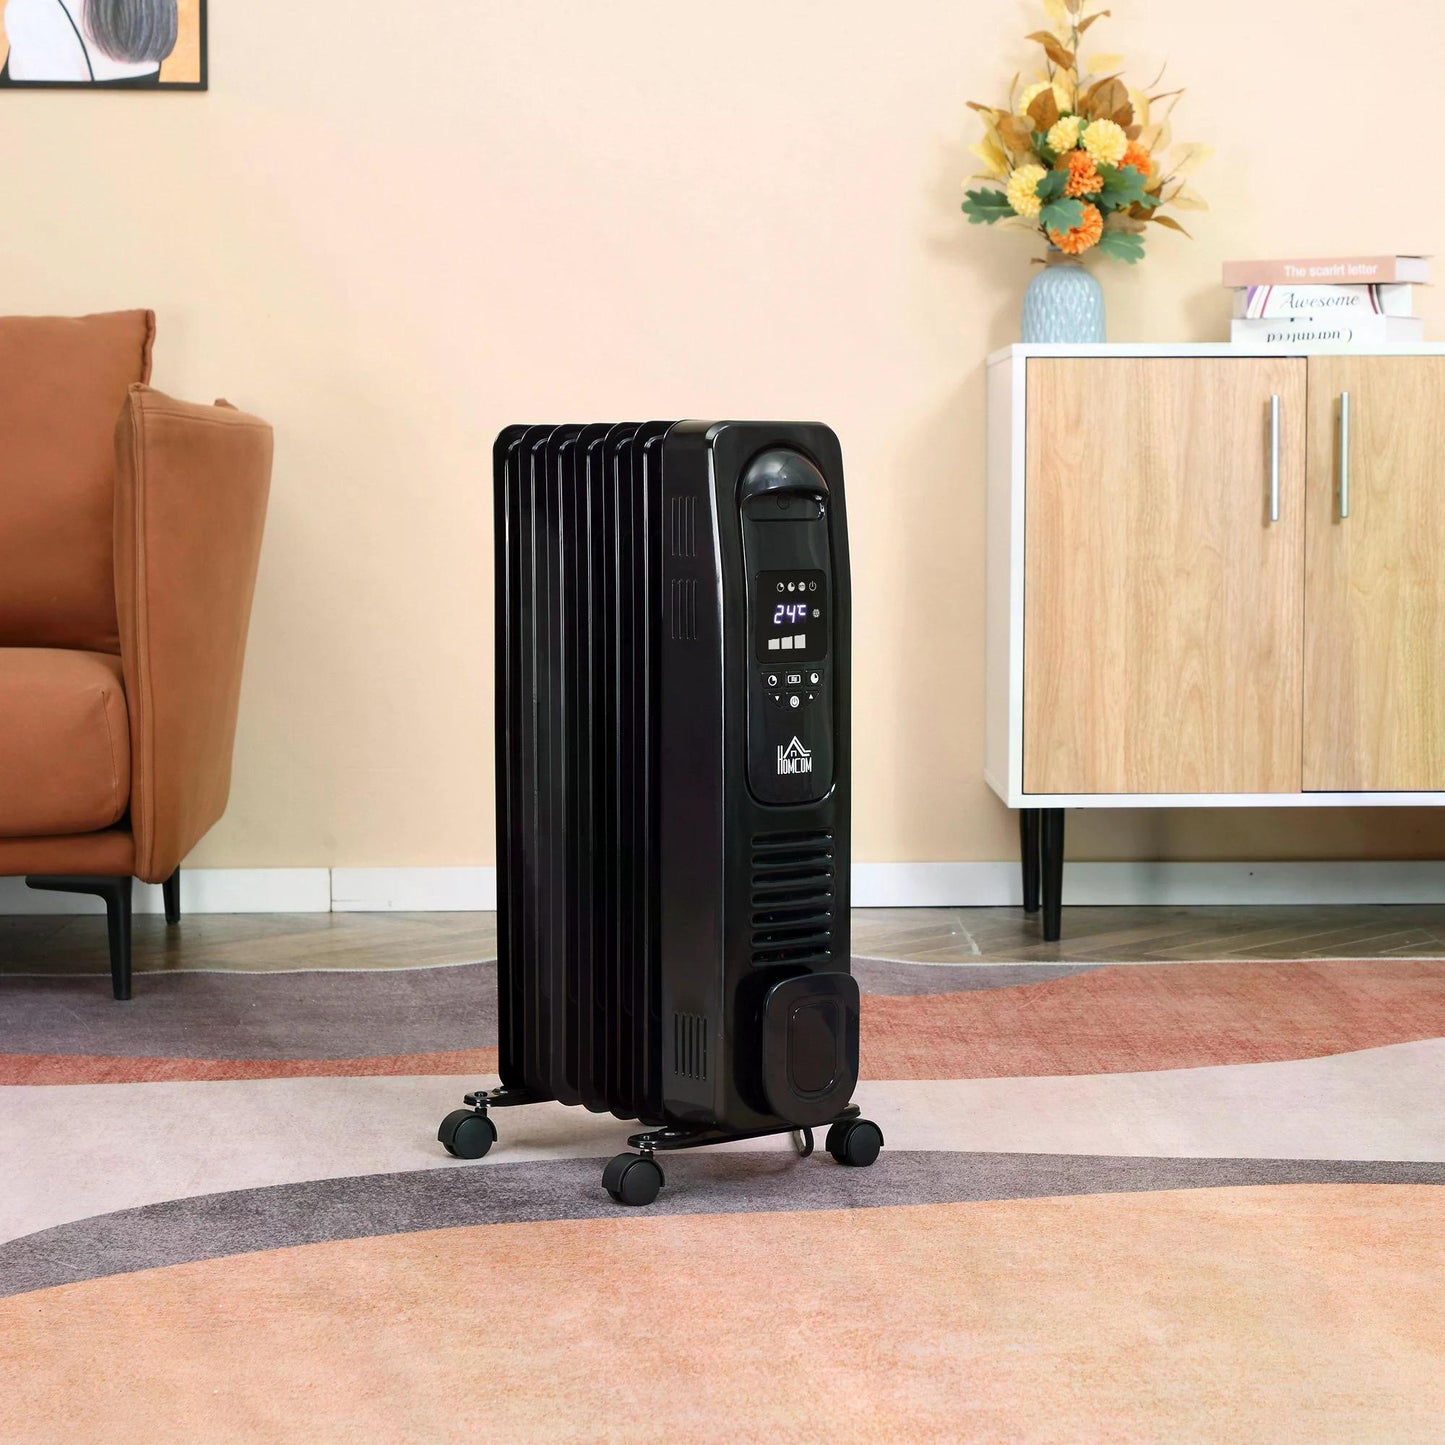 HOMCOM 1630W Digital Oil Filled Radiator, 7 Fin, Portable Electric Heater with LED Display, Built-in Timer, 3 Heat Settings, Remote Control, Black